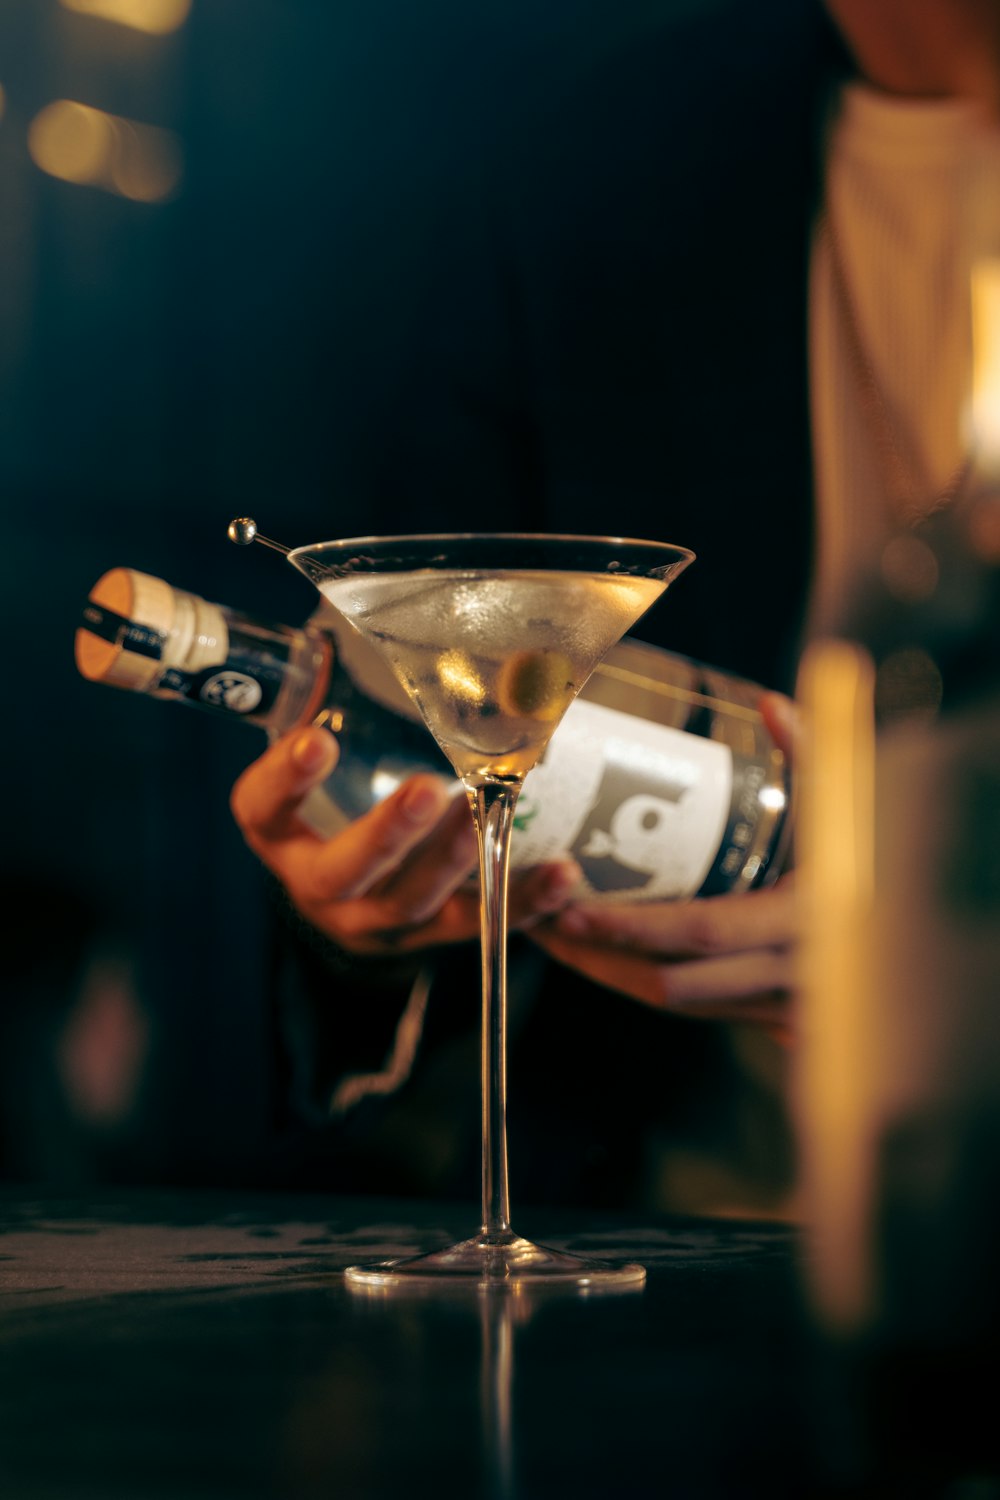 a person pouring a drink into a martini glass